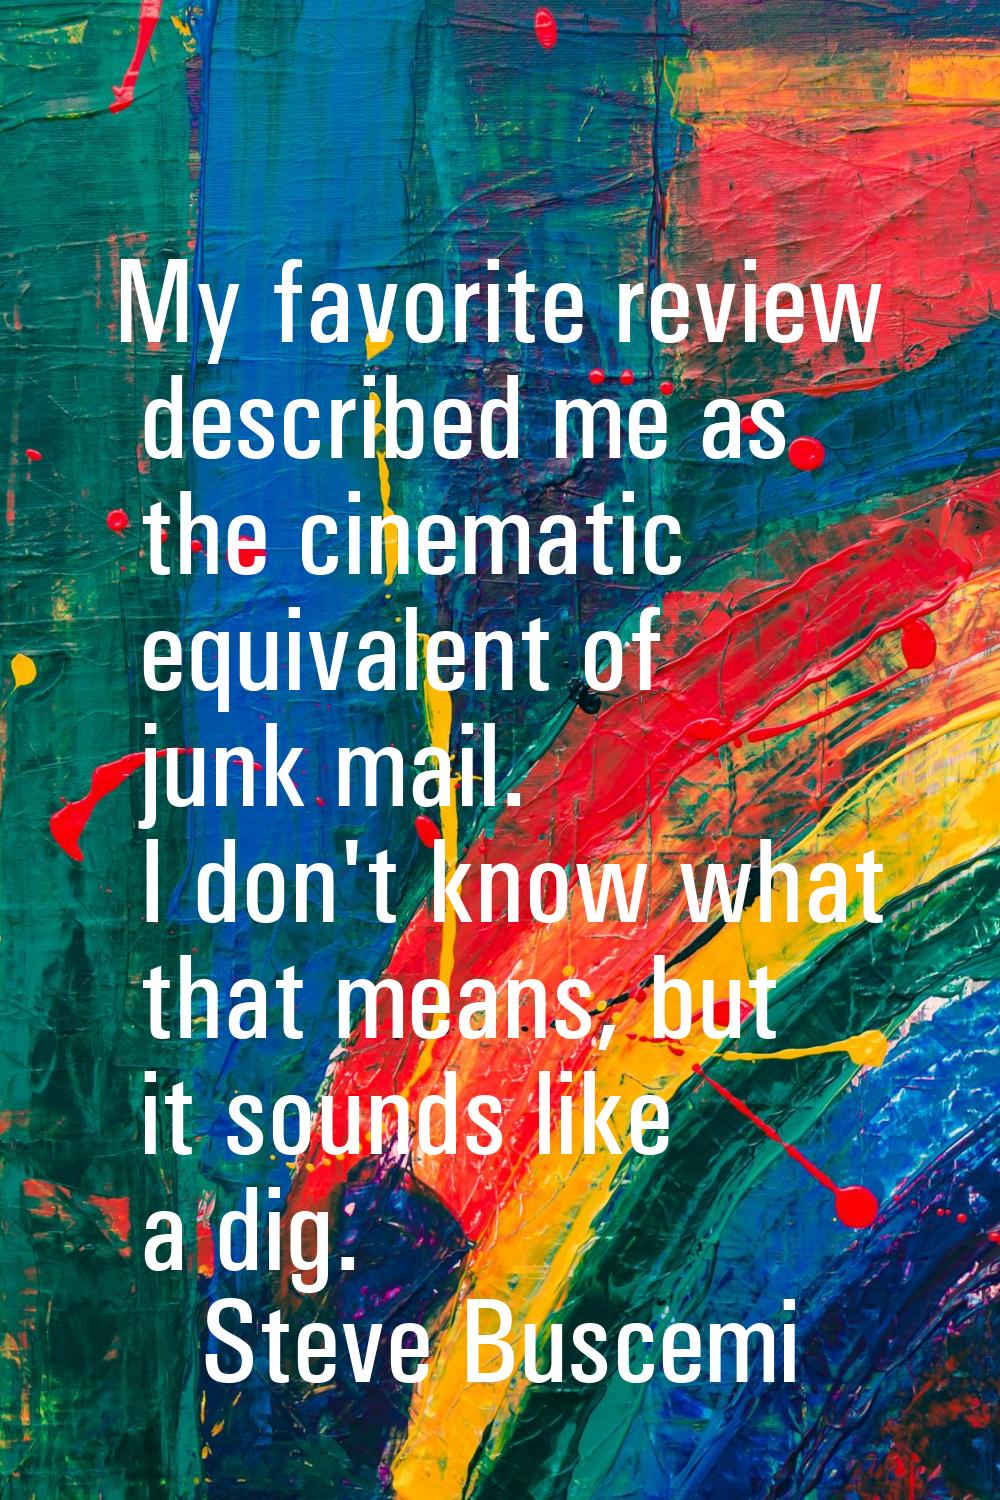 My favorite review described me as the cinematic equivalent of junk mail. I don't know what that me